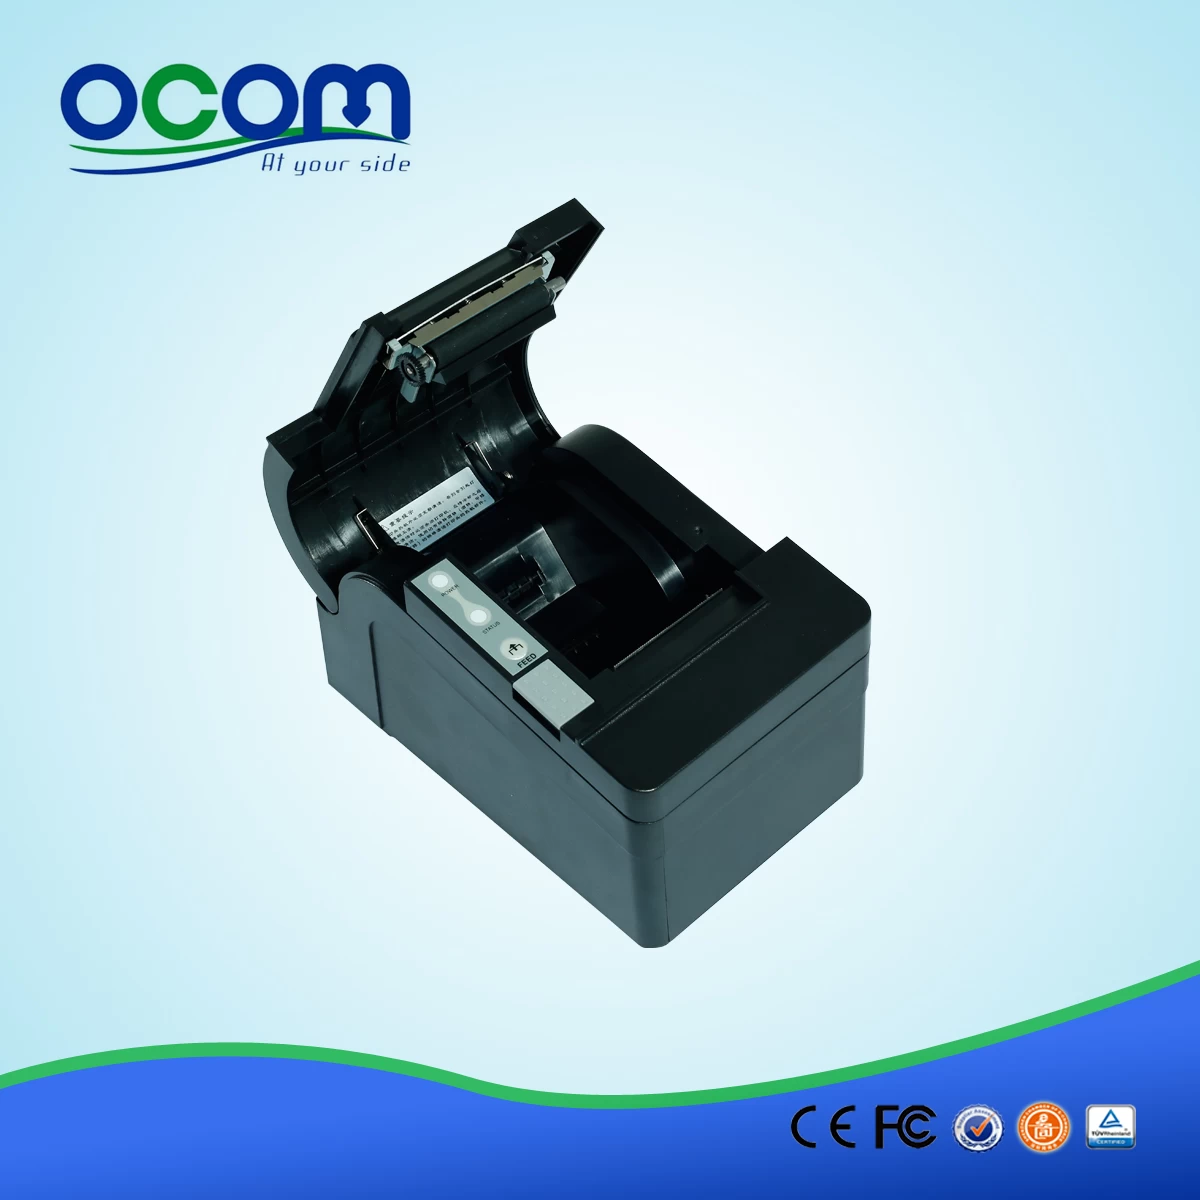 2 inch auto cutter pos thermal printer